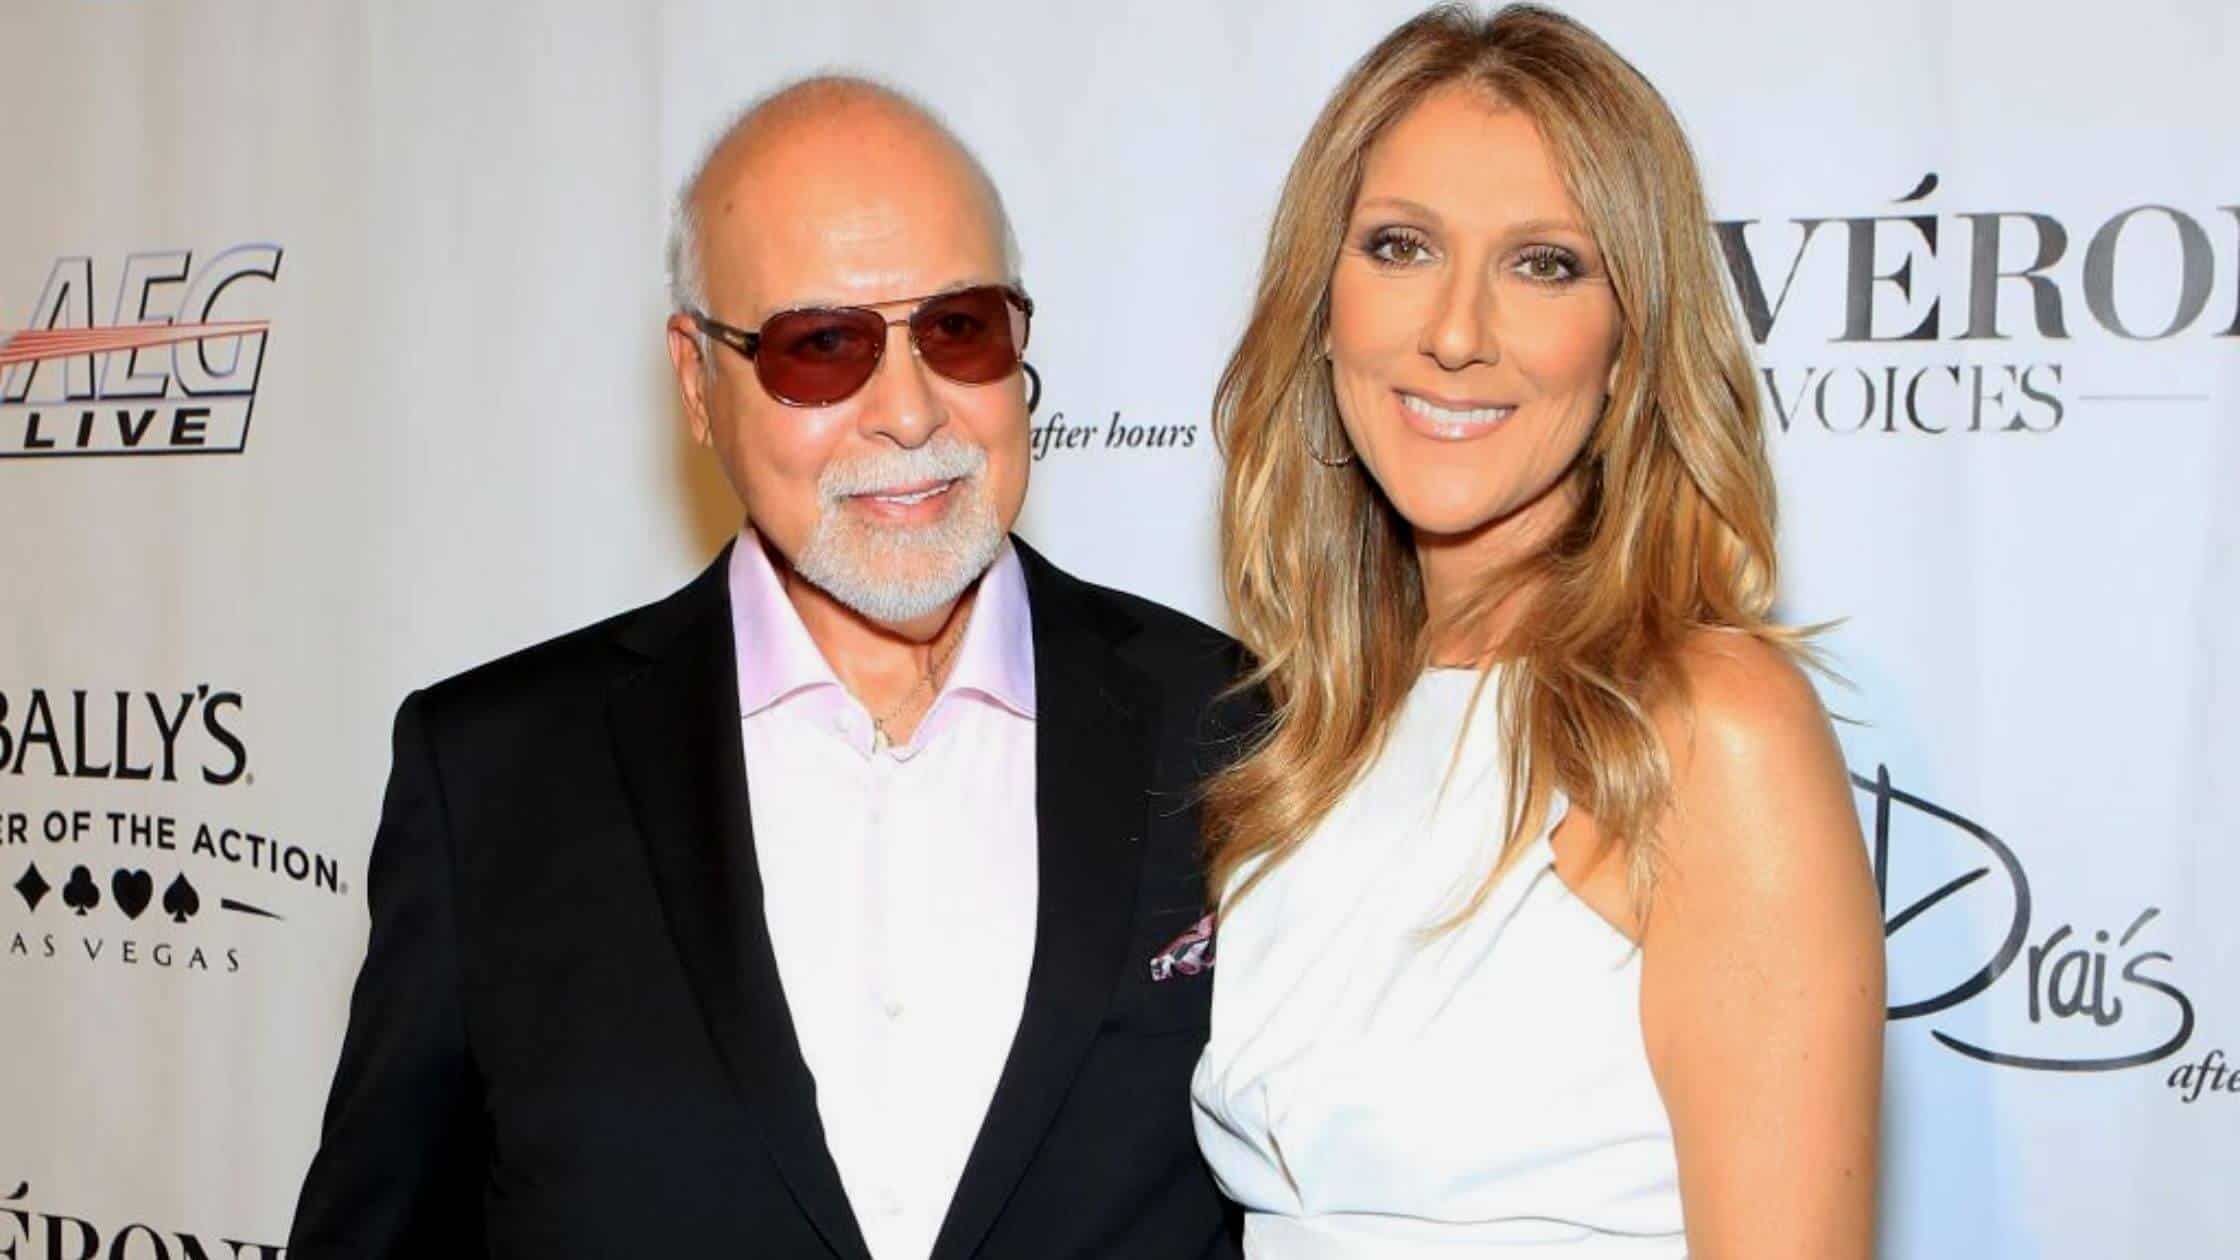 Complete Relationship History Of Celine Dion And Rene Angelil